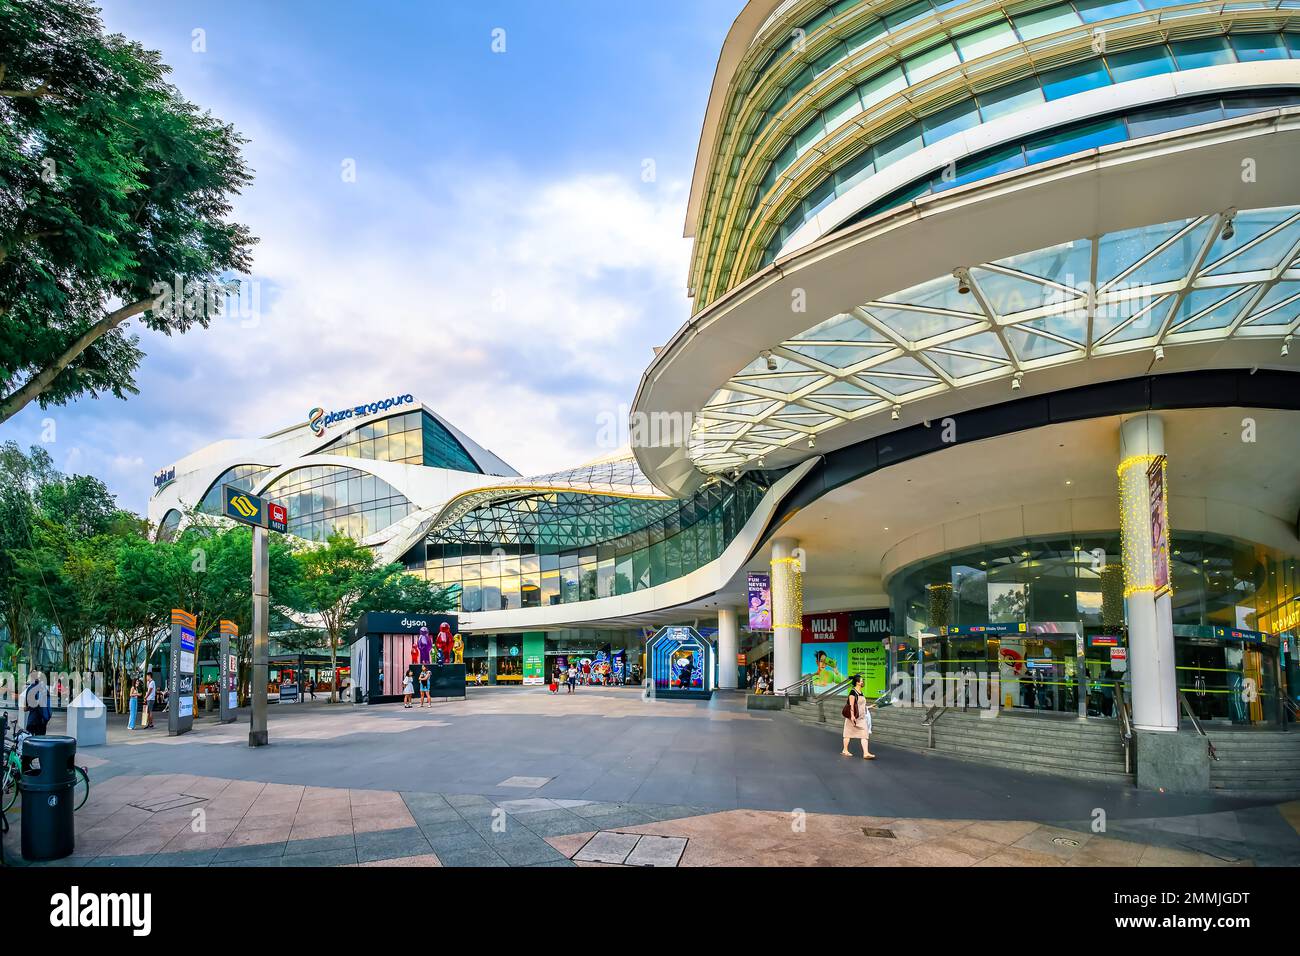 Plaza Singapura is a contemporary shopping mall located along Orchard Road, Singapore, next to Dhoby Ghaut MRT station. Stock Photo